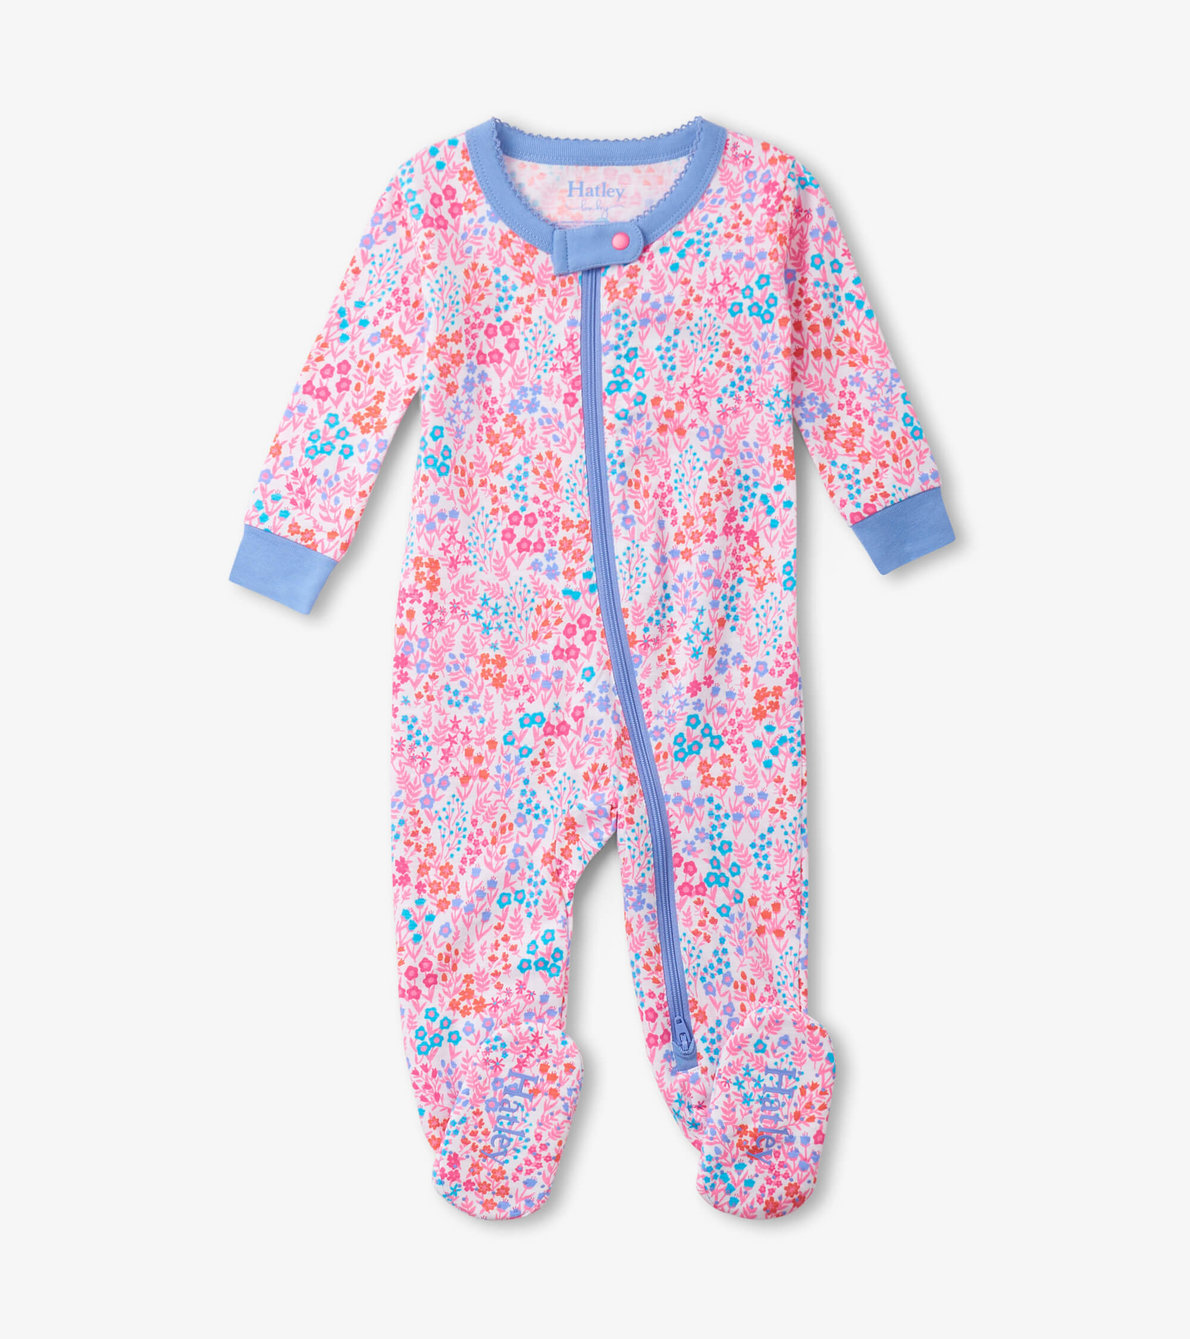 View larger image of Baby Girls Ditsy Floral Footed Sleeper